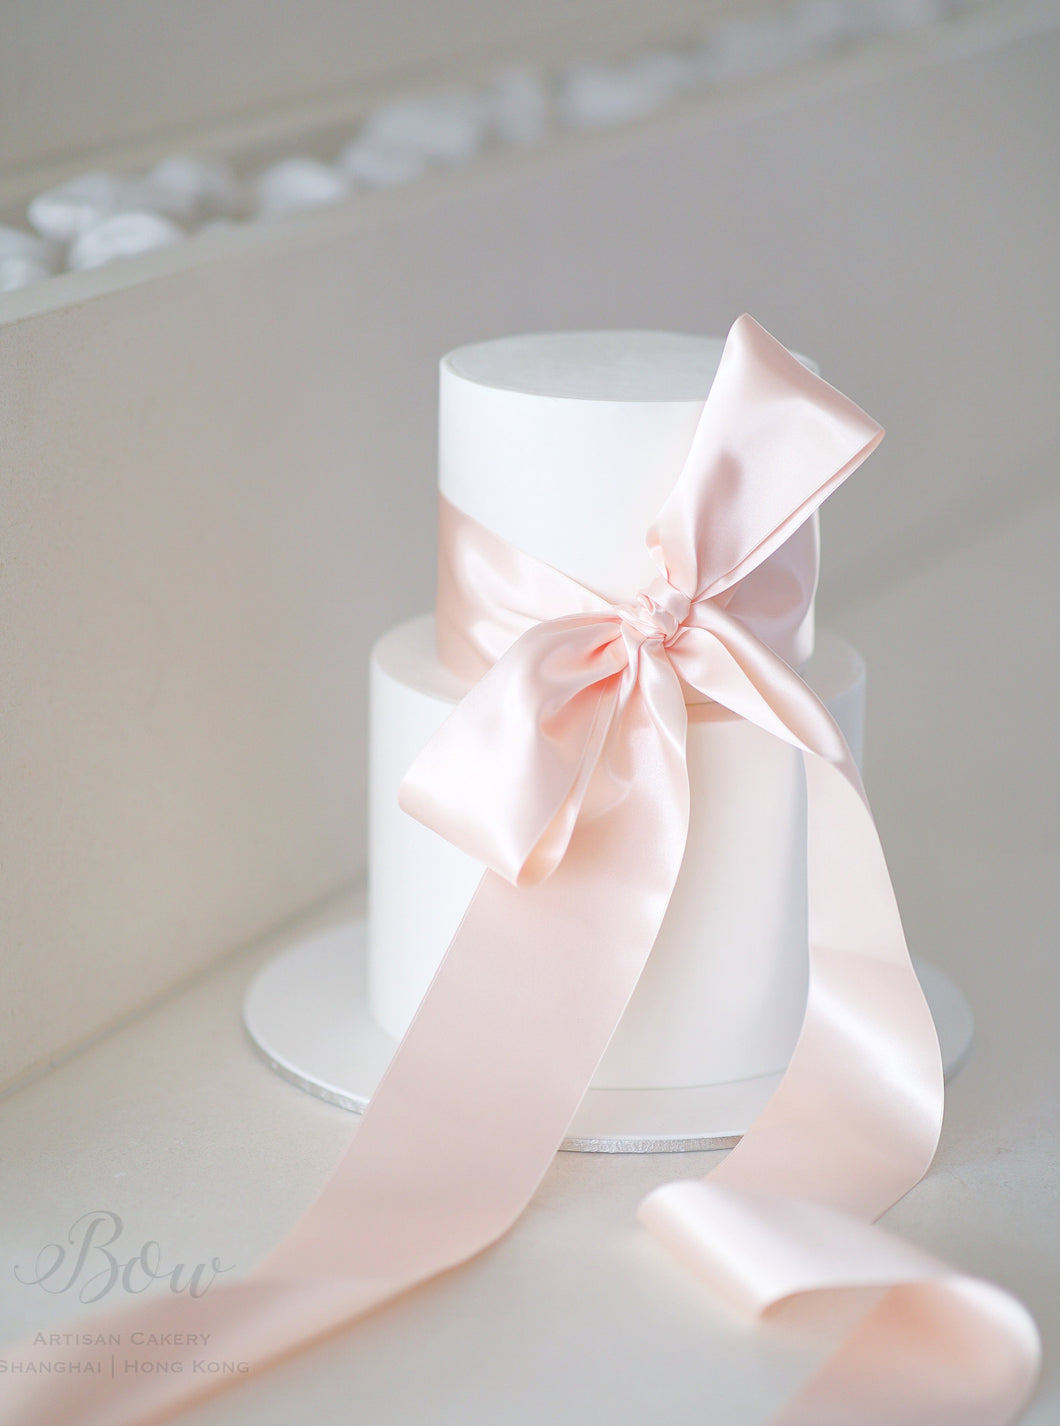 Display Cake - Wedding Cake with a BOW [Two Tier]